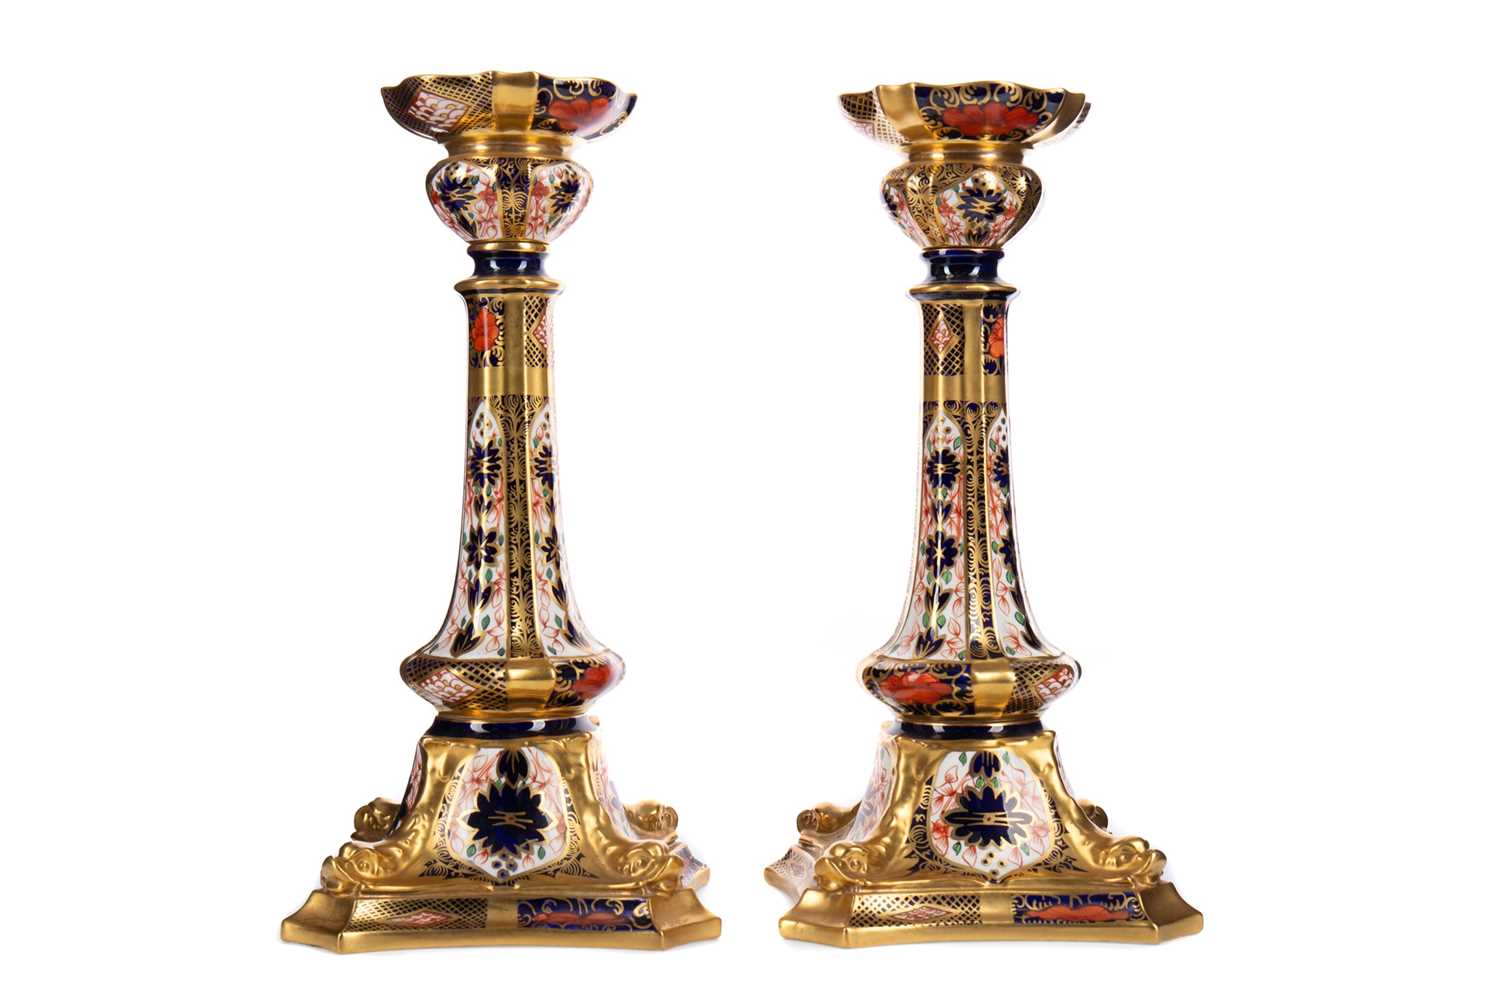 Lot 1100 - A PAIR OF ROYAL CROWN DERBY TABLE CANDLESTICKS